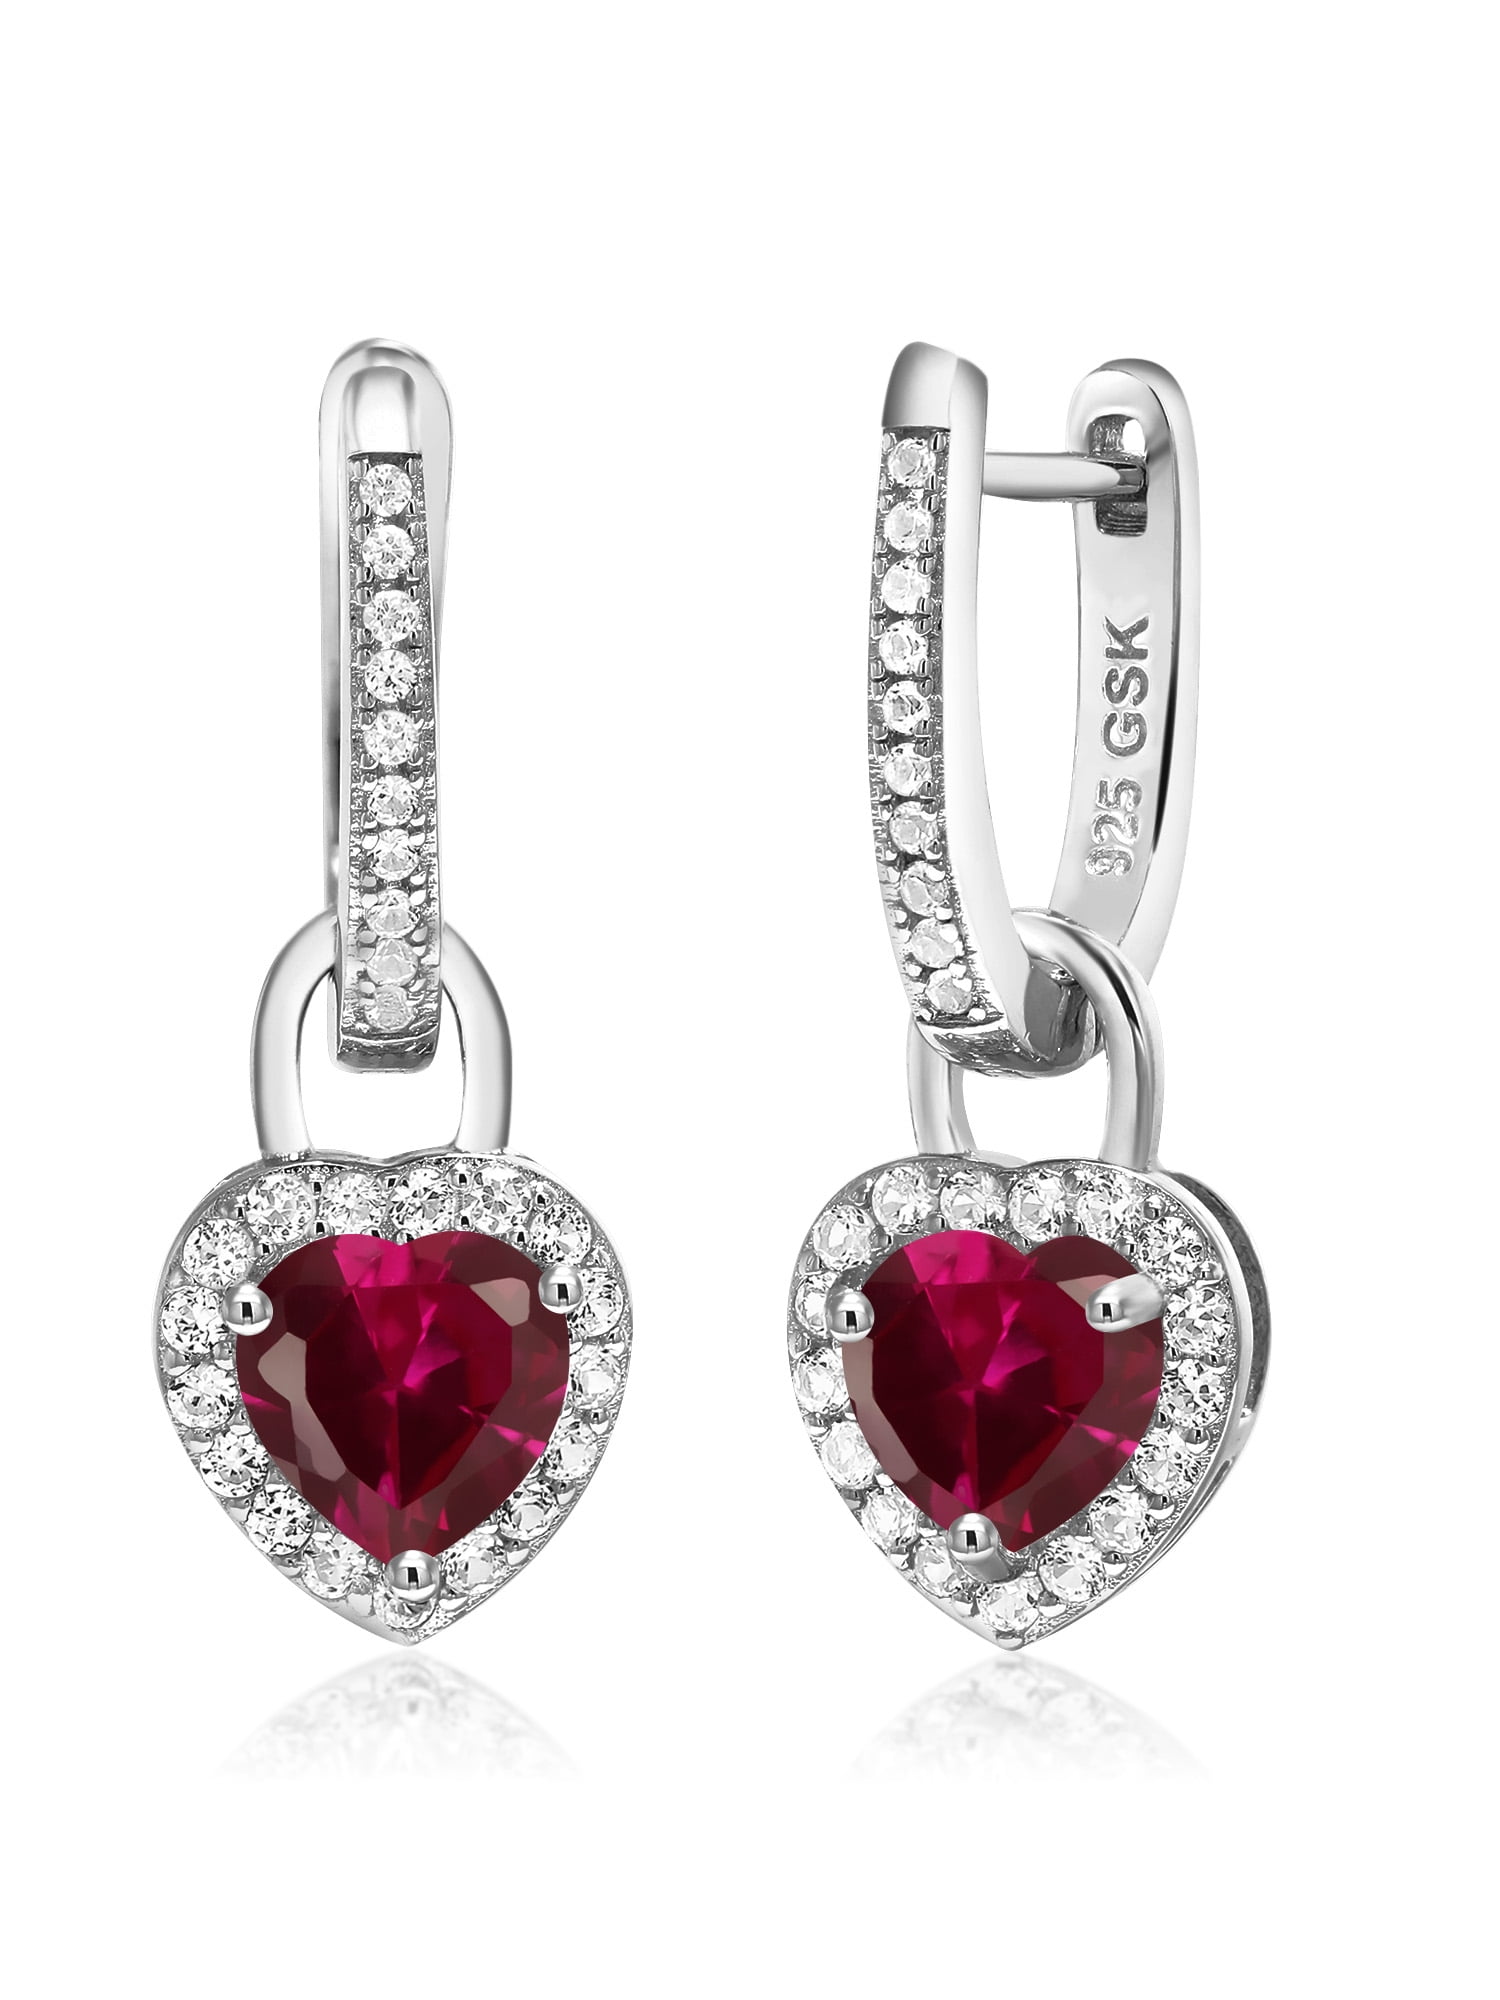 Pendant earrings ruby and with marcasite. in 925 silver zafiro with natural stones emerald roots